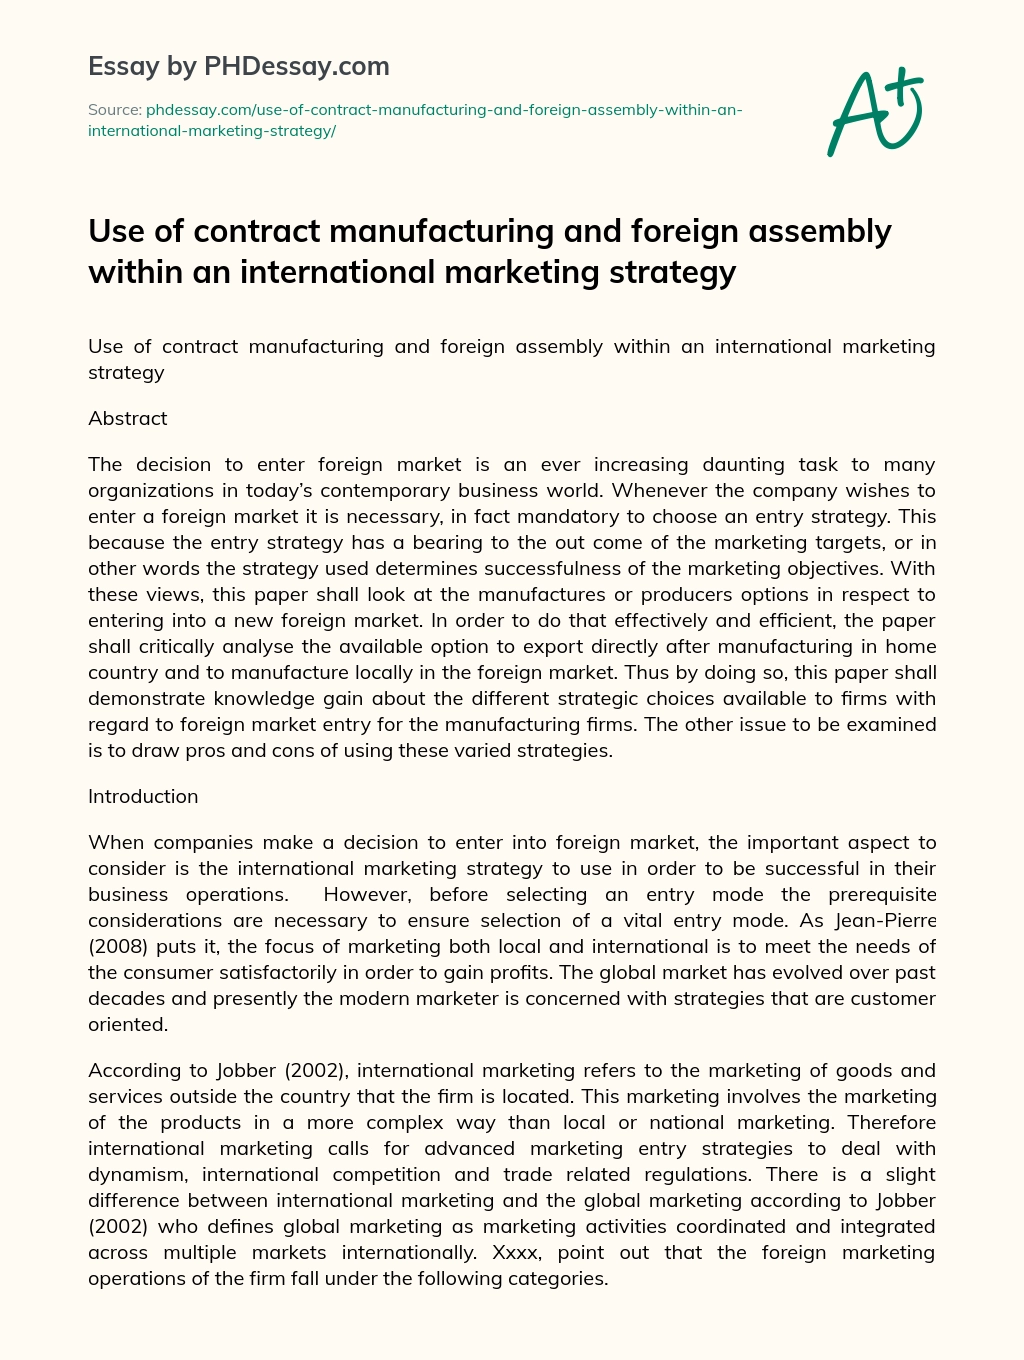 Contract Manufacturing and Foreign Assembly Within an International Marketing Strategy essay